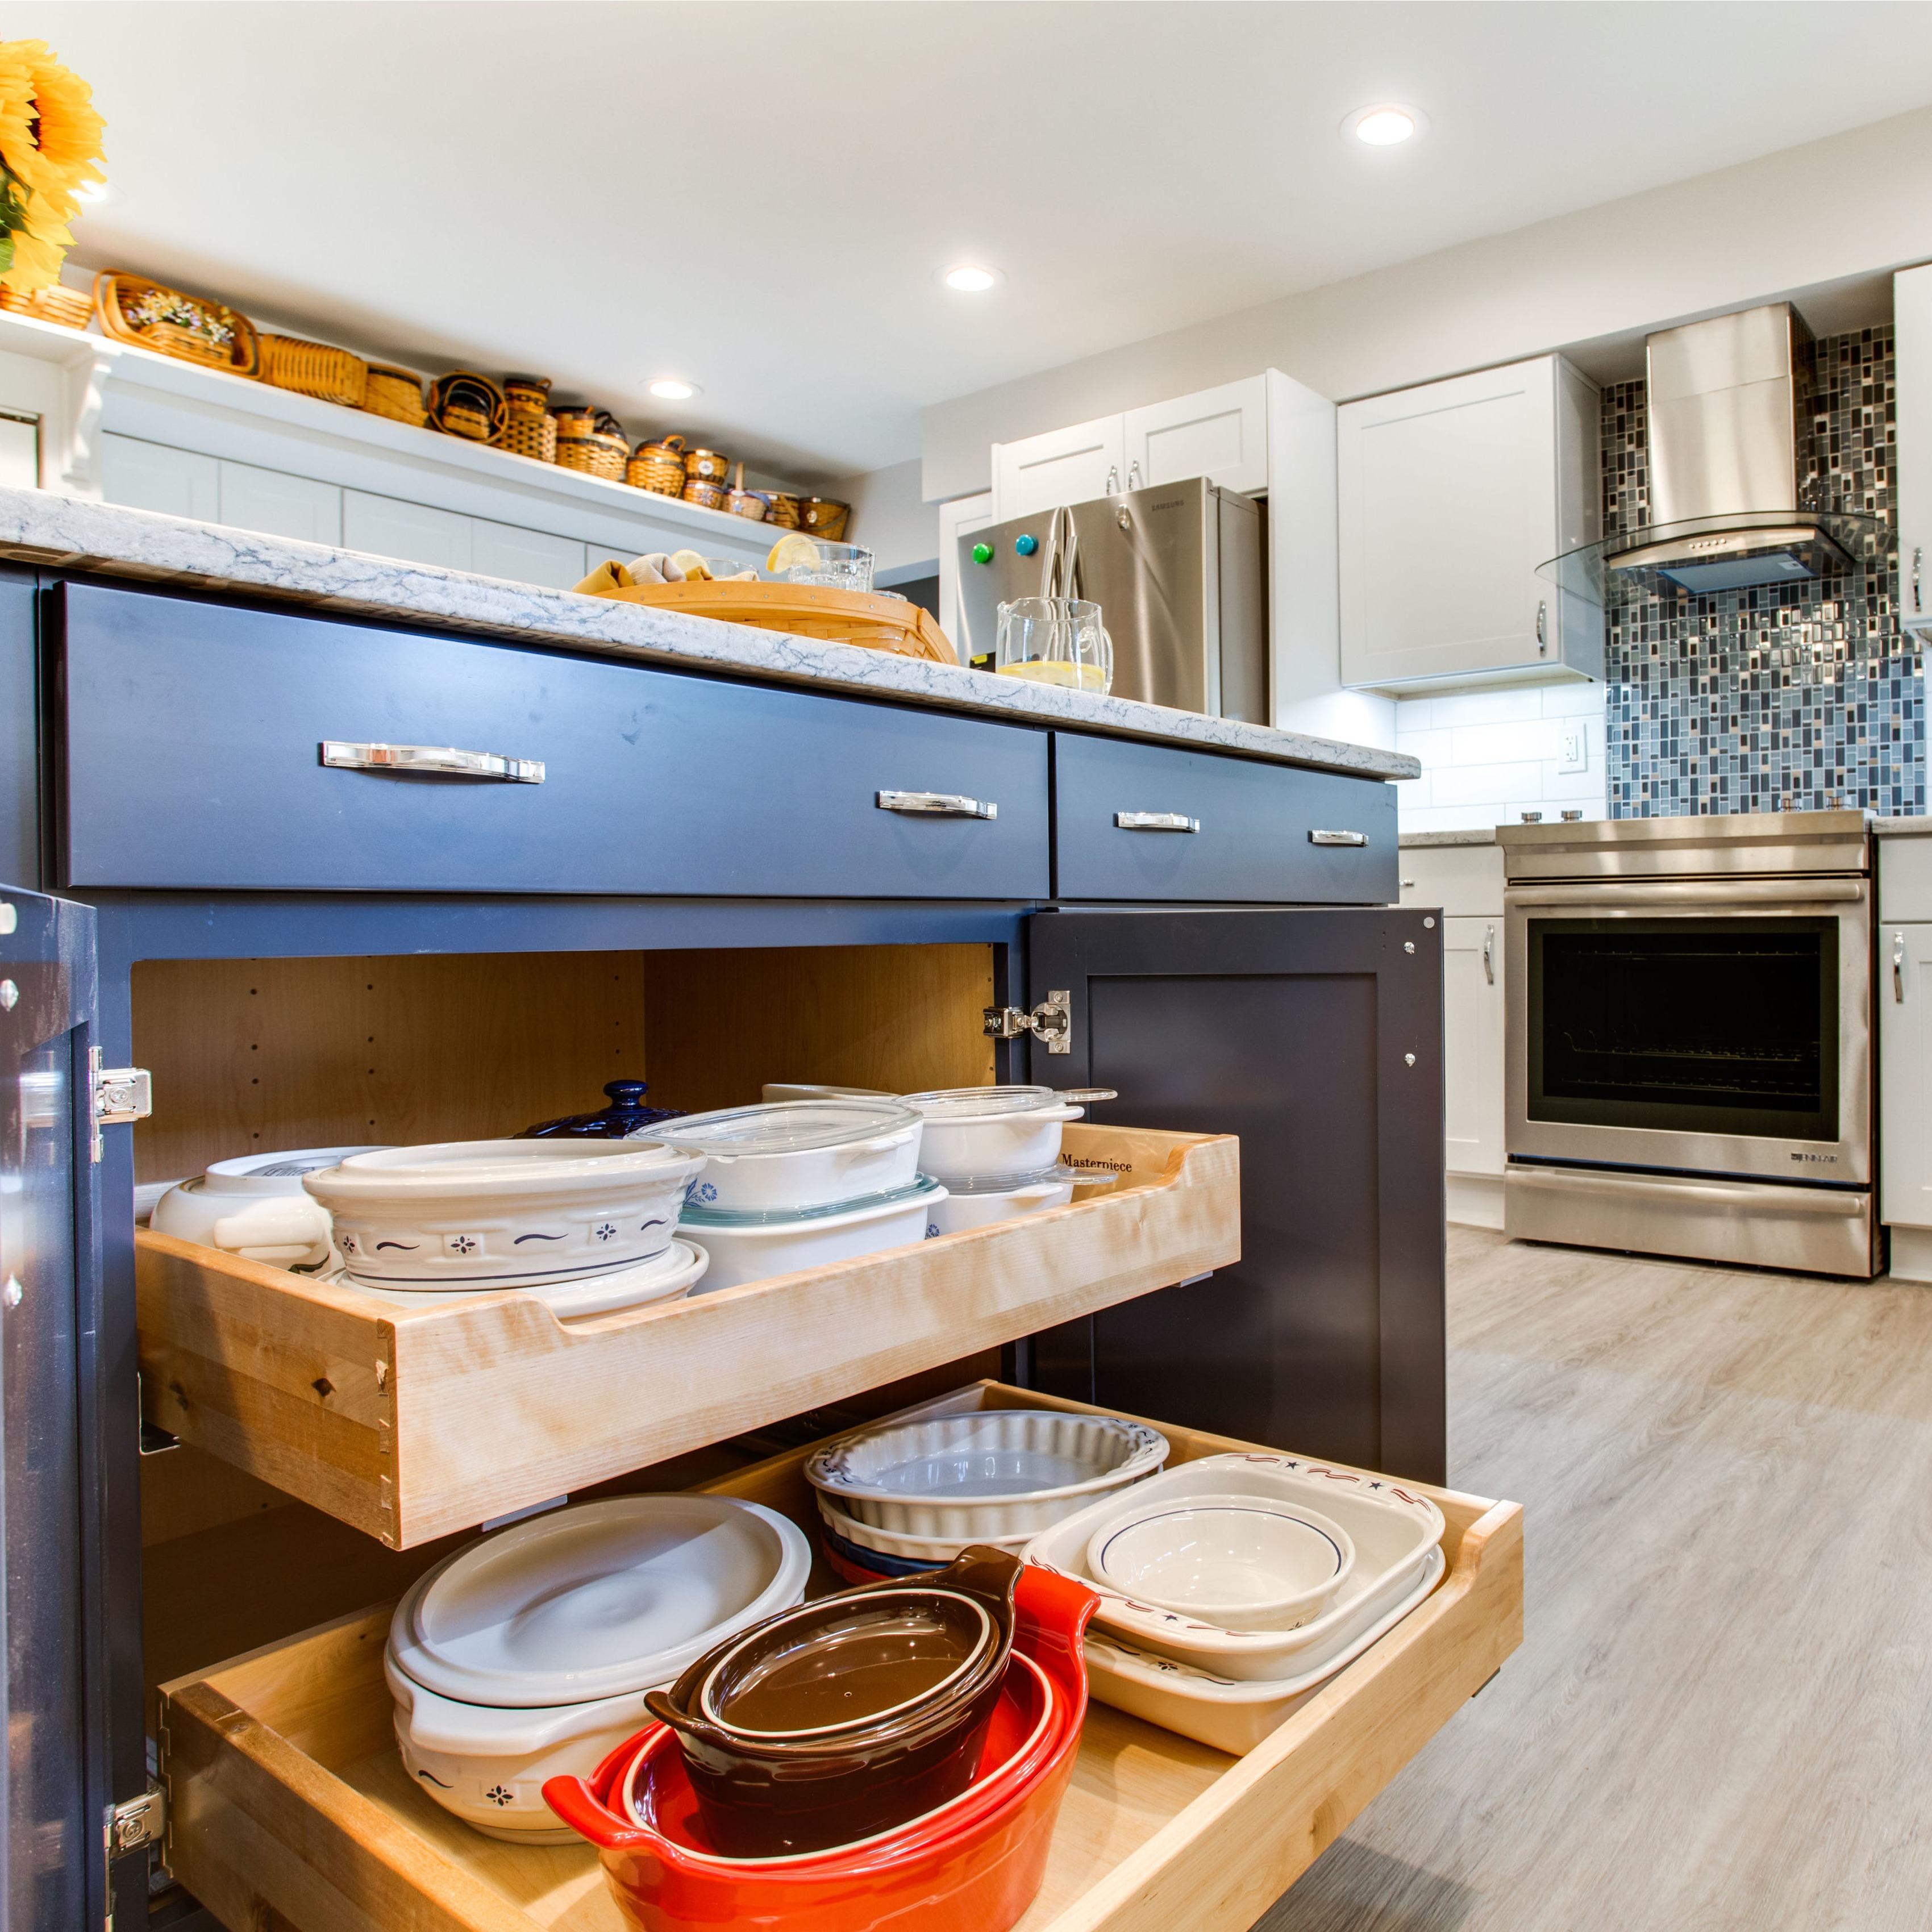 Kitchen cabinet accessories are an important part of every kitchen design.  Ask what cabinet accessories are options for your kitchen cabinets.